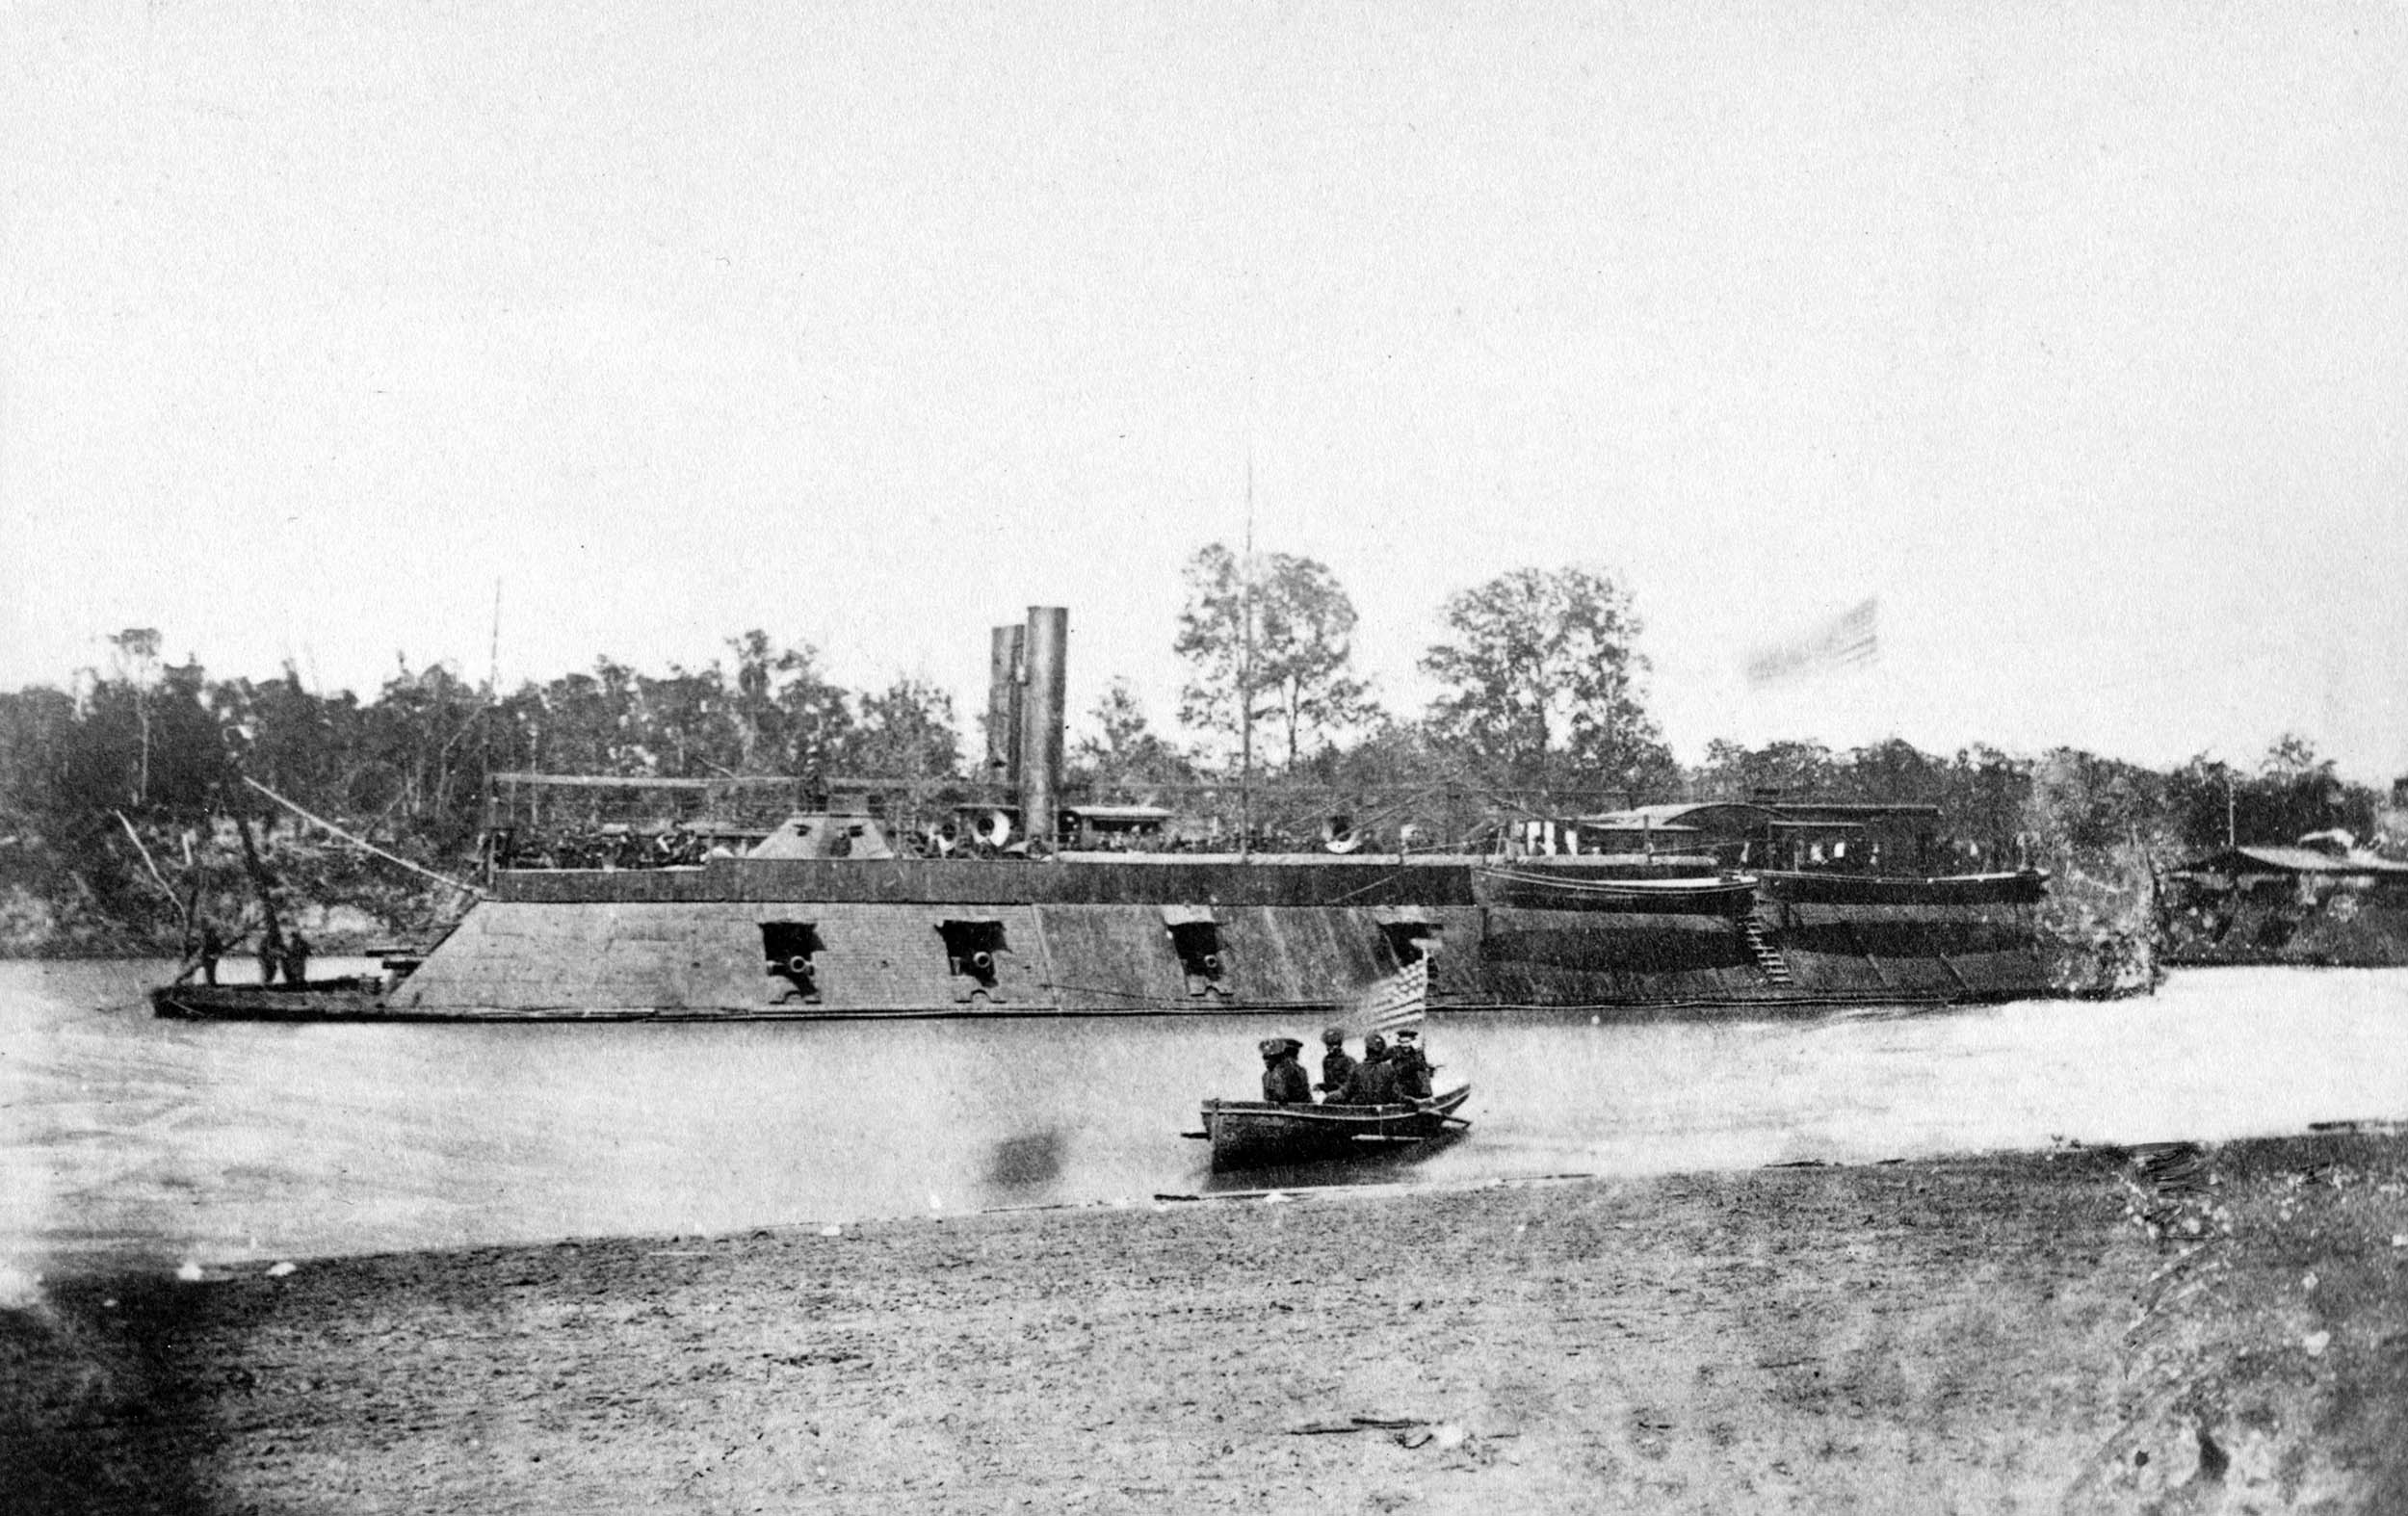 U.S. Navy City-class ironclad gunboat USS Pittsburgh, on western river, during Civil War (Library of Congress/Naval History and Heritage Command)